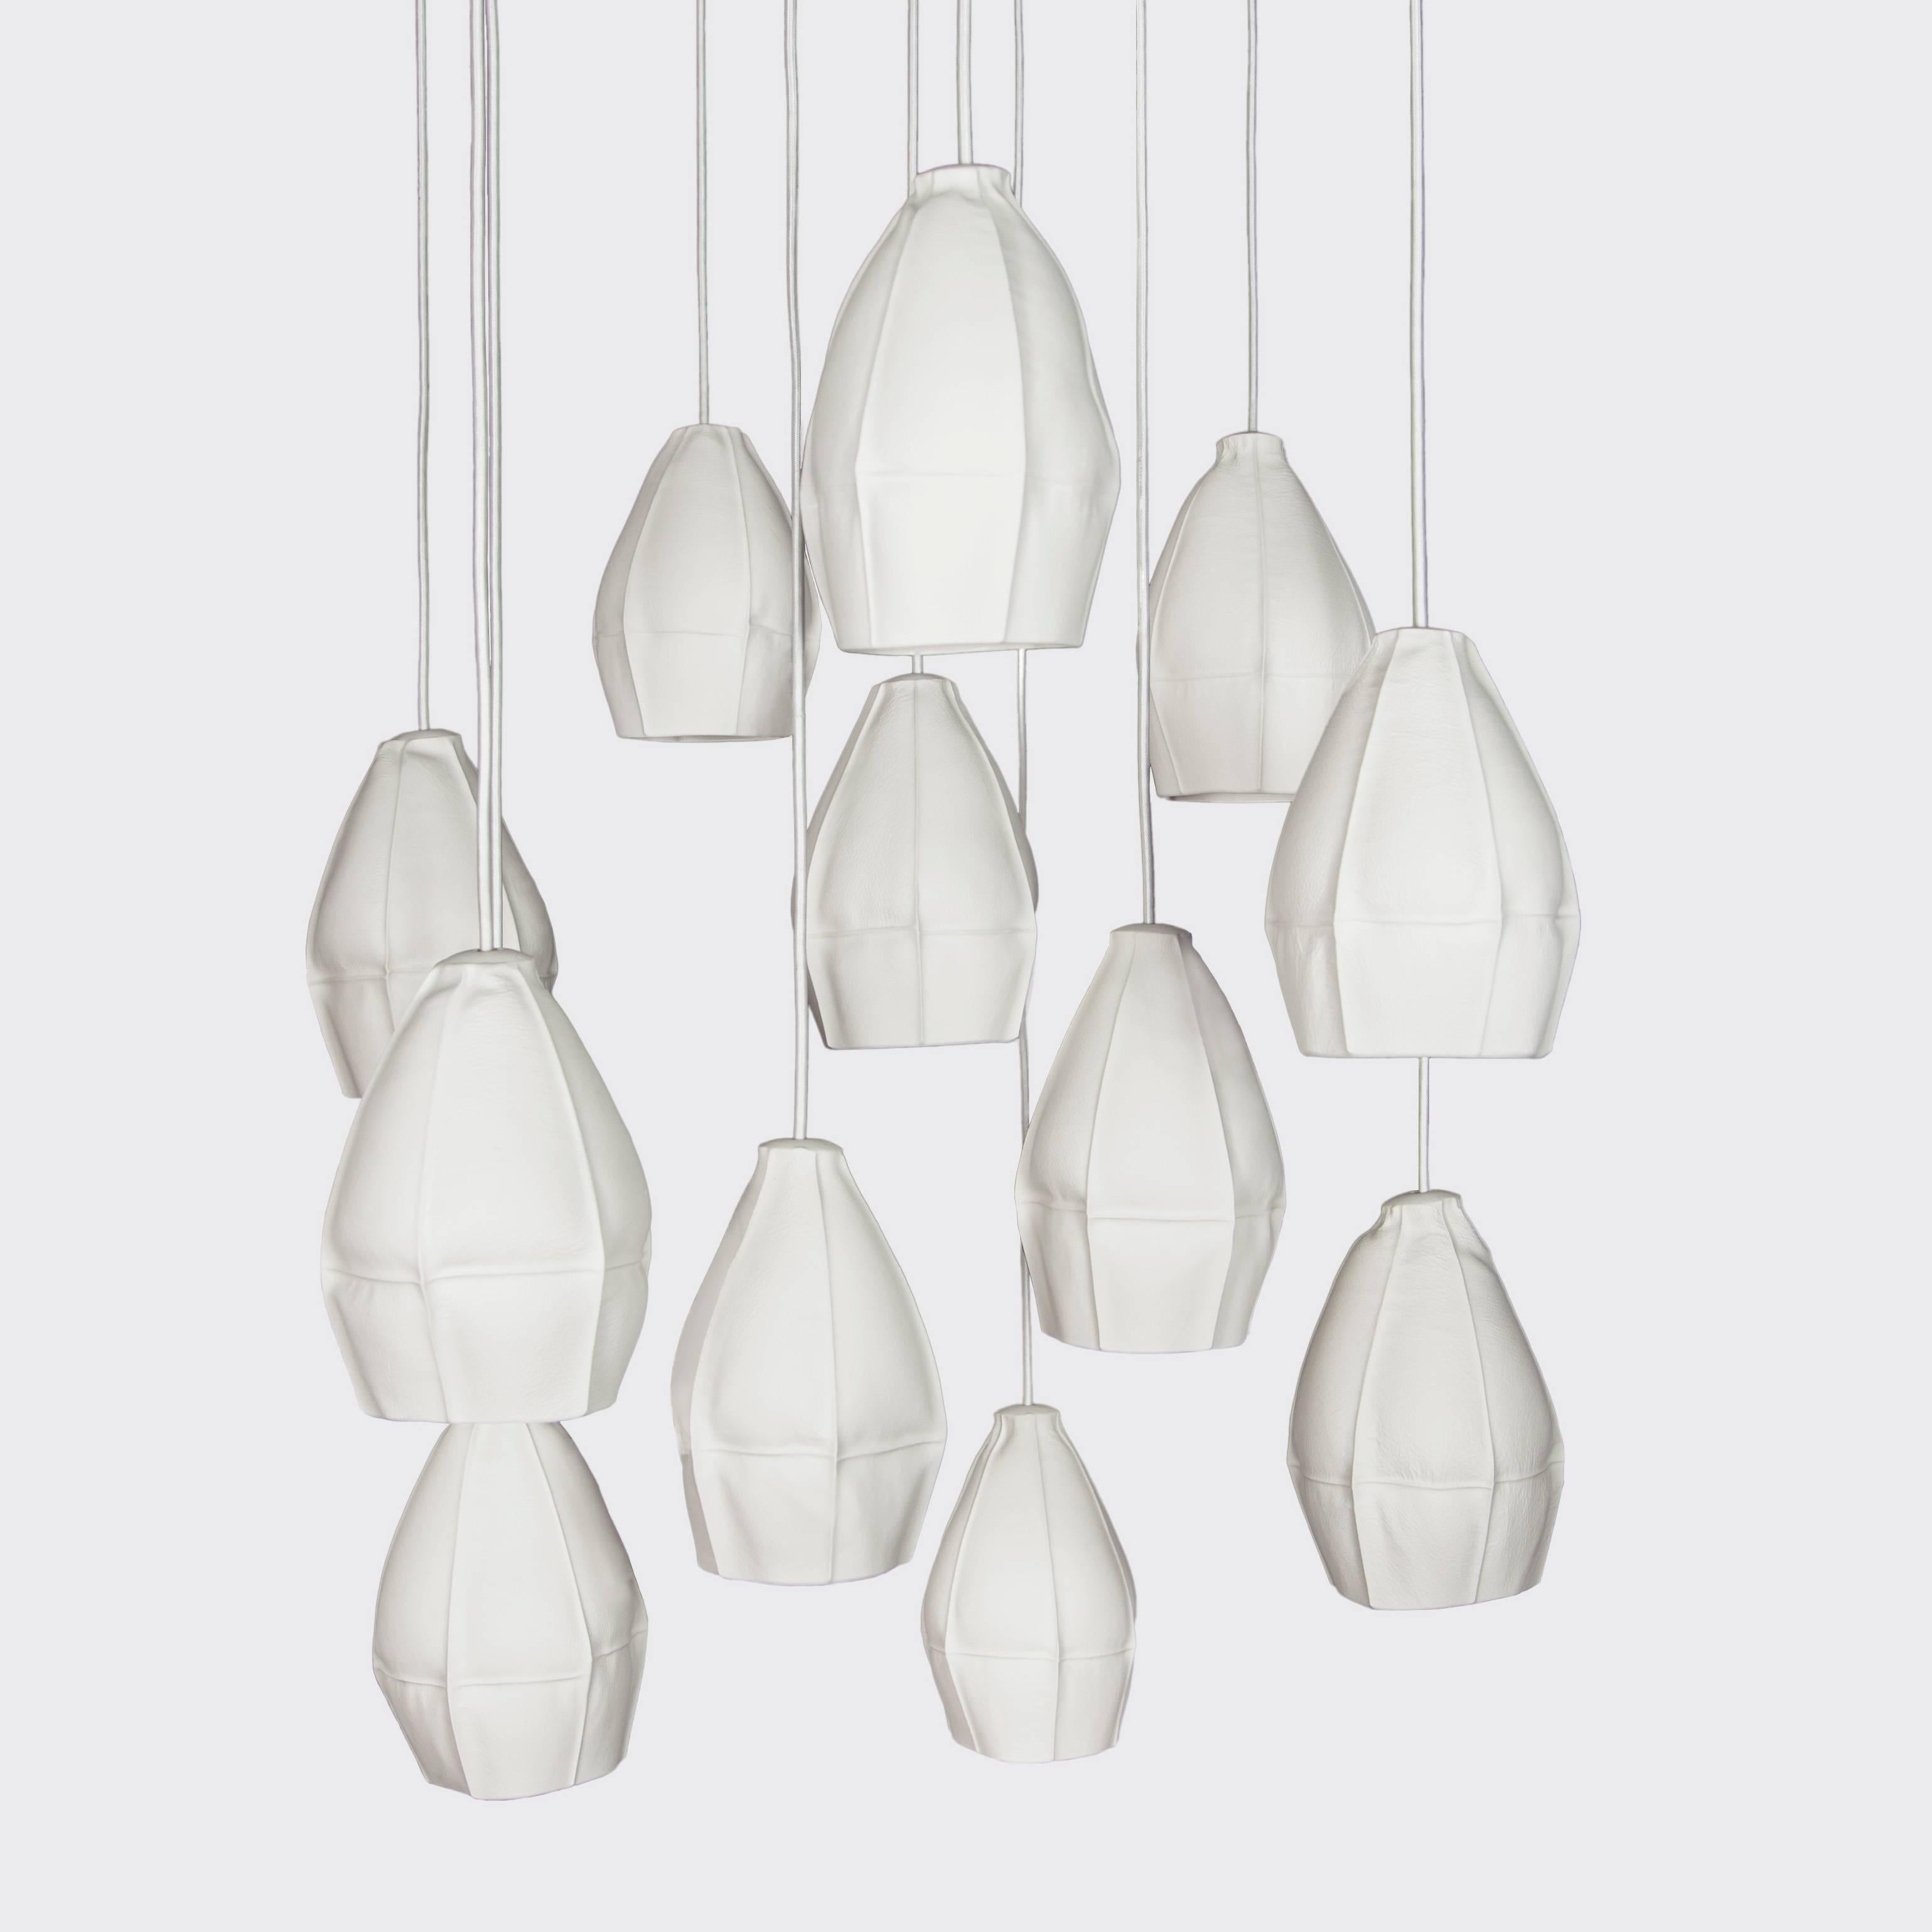 Souda's Kawa pendant lights are slip cast porcelain directly into dozens of leather molds resulting in highly-unique ceramic shades. The finalized pendant lights are dynamic and highly-unusual, emitting a soft glow that works well individually or in